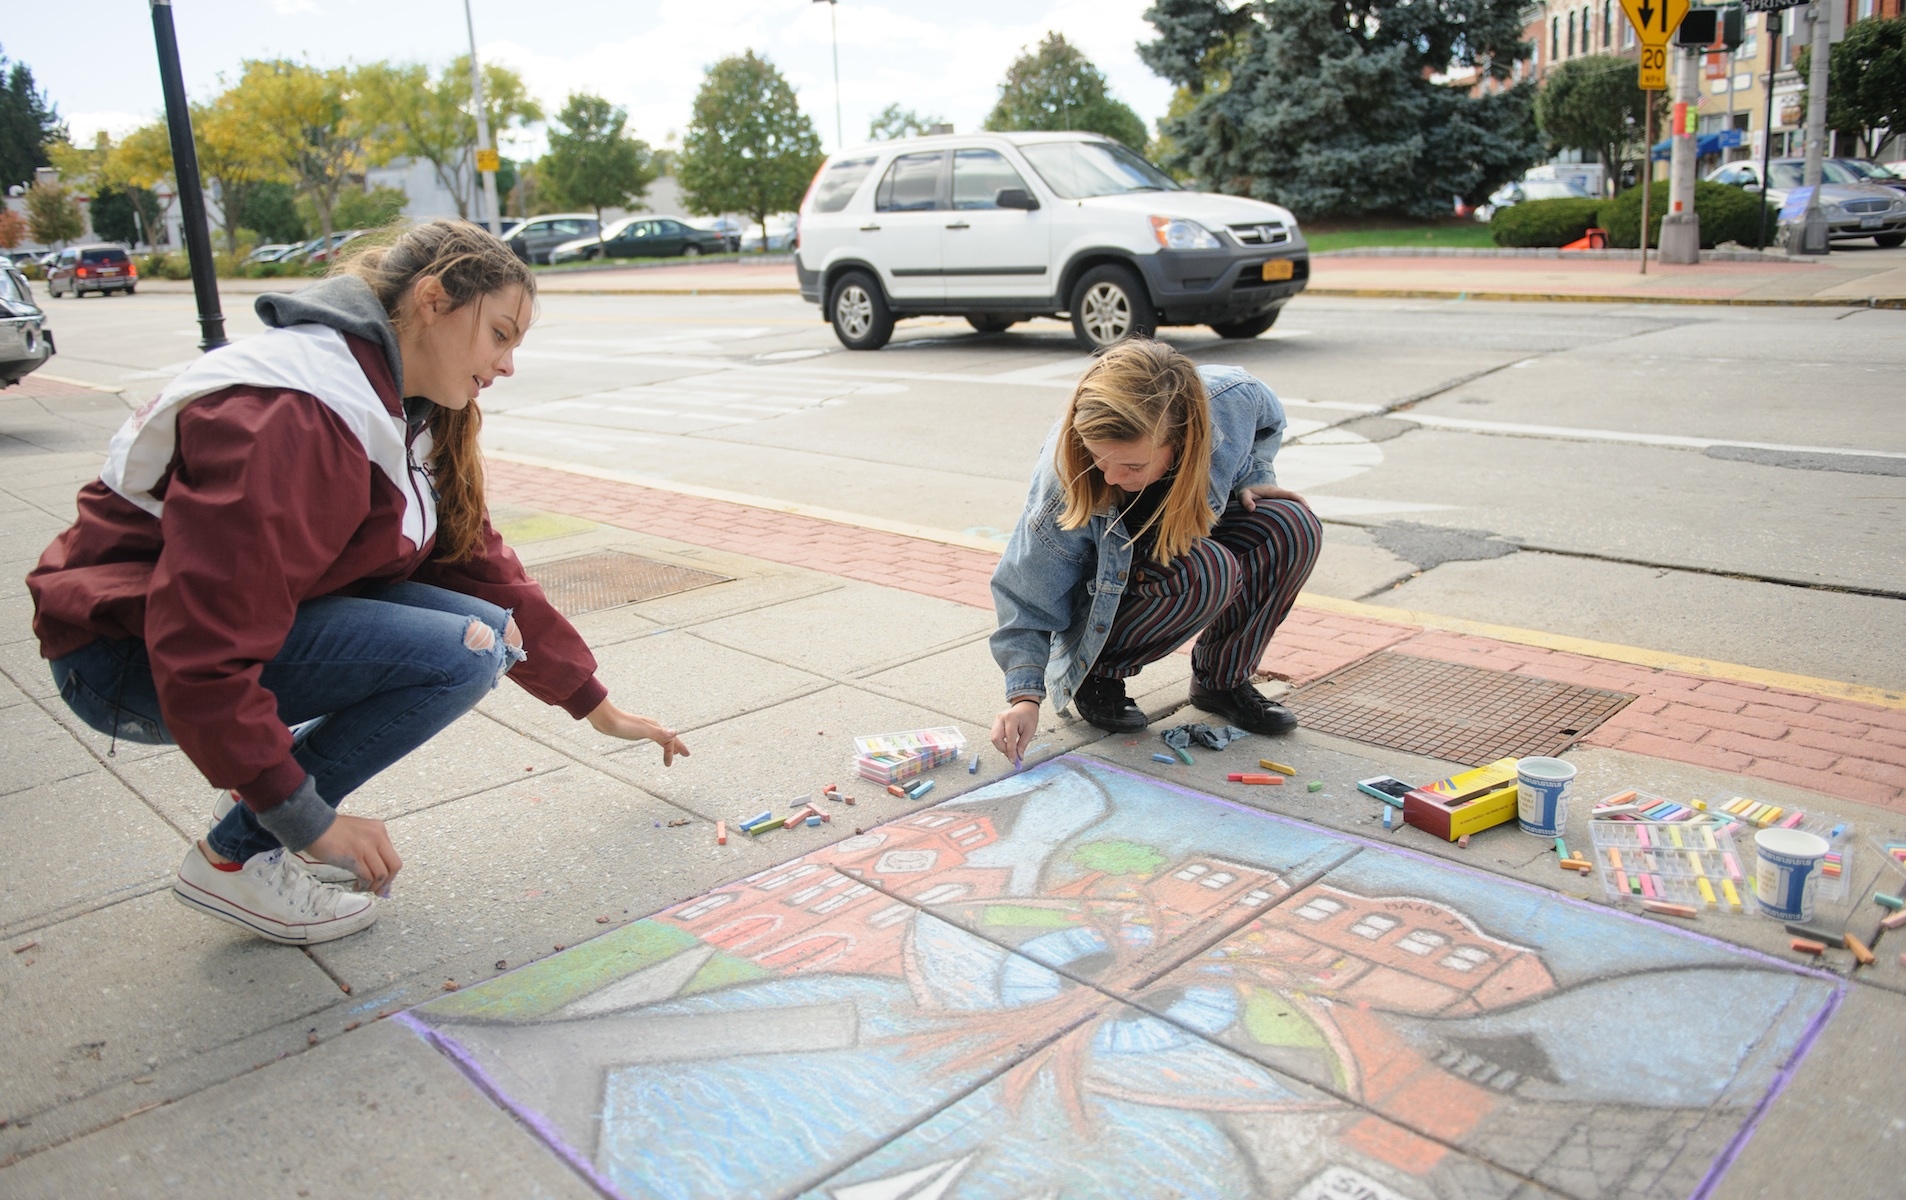 Ossining artists Zoe Supina and Melissa Twomey received first place at the Village’s Chalk It Up! festival last year. Photo by: Michael Lee.